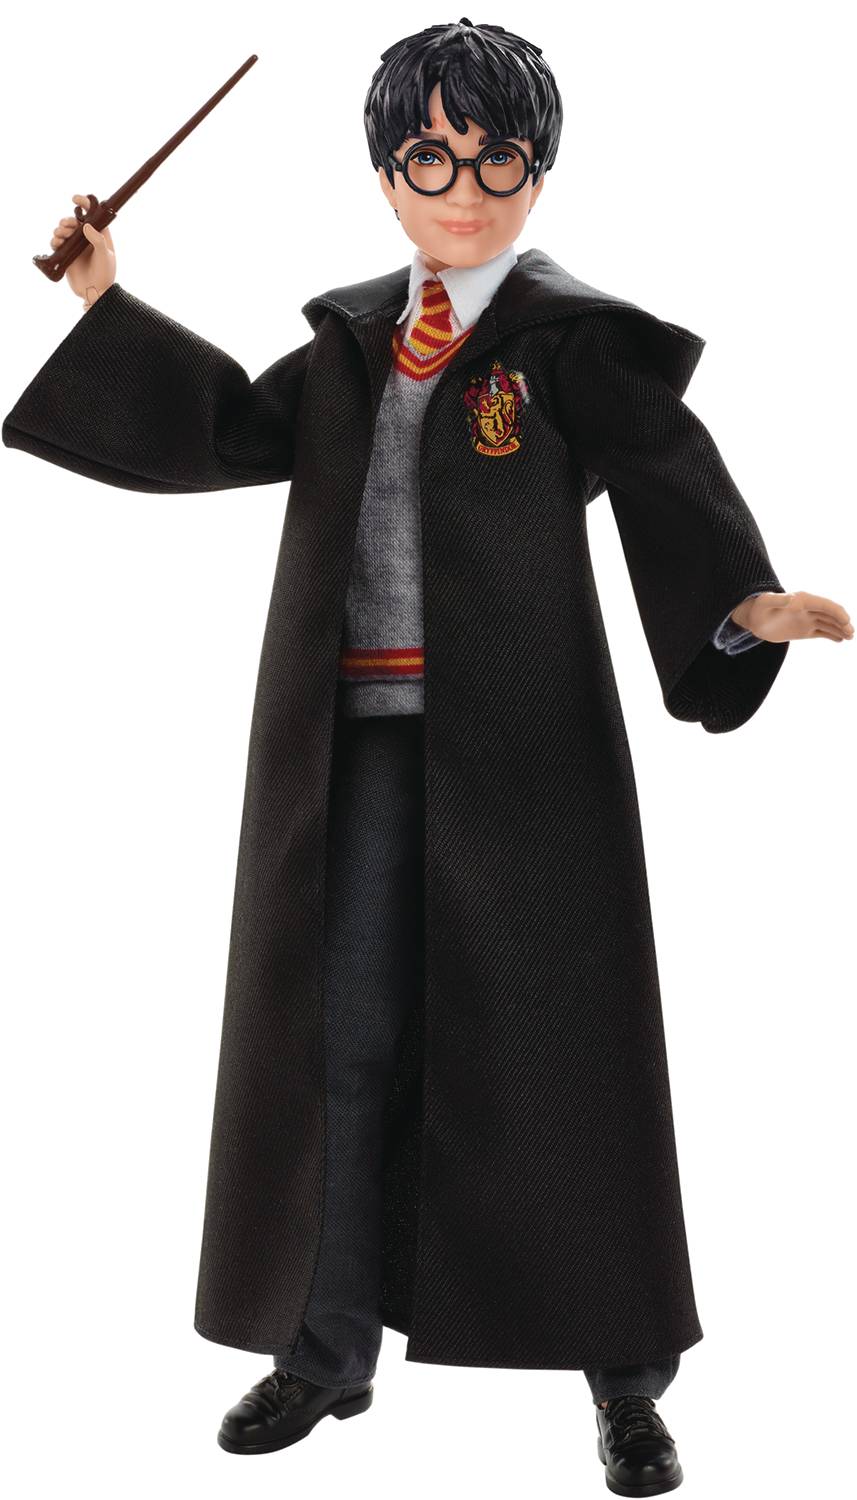 HARRY POTTER COS 7IN SCALE HARRY POTTER DOLL